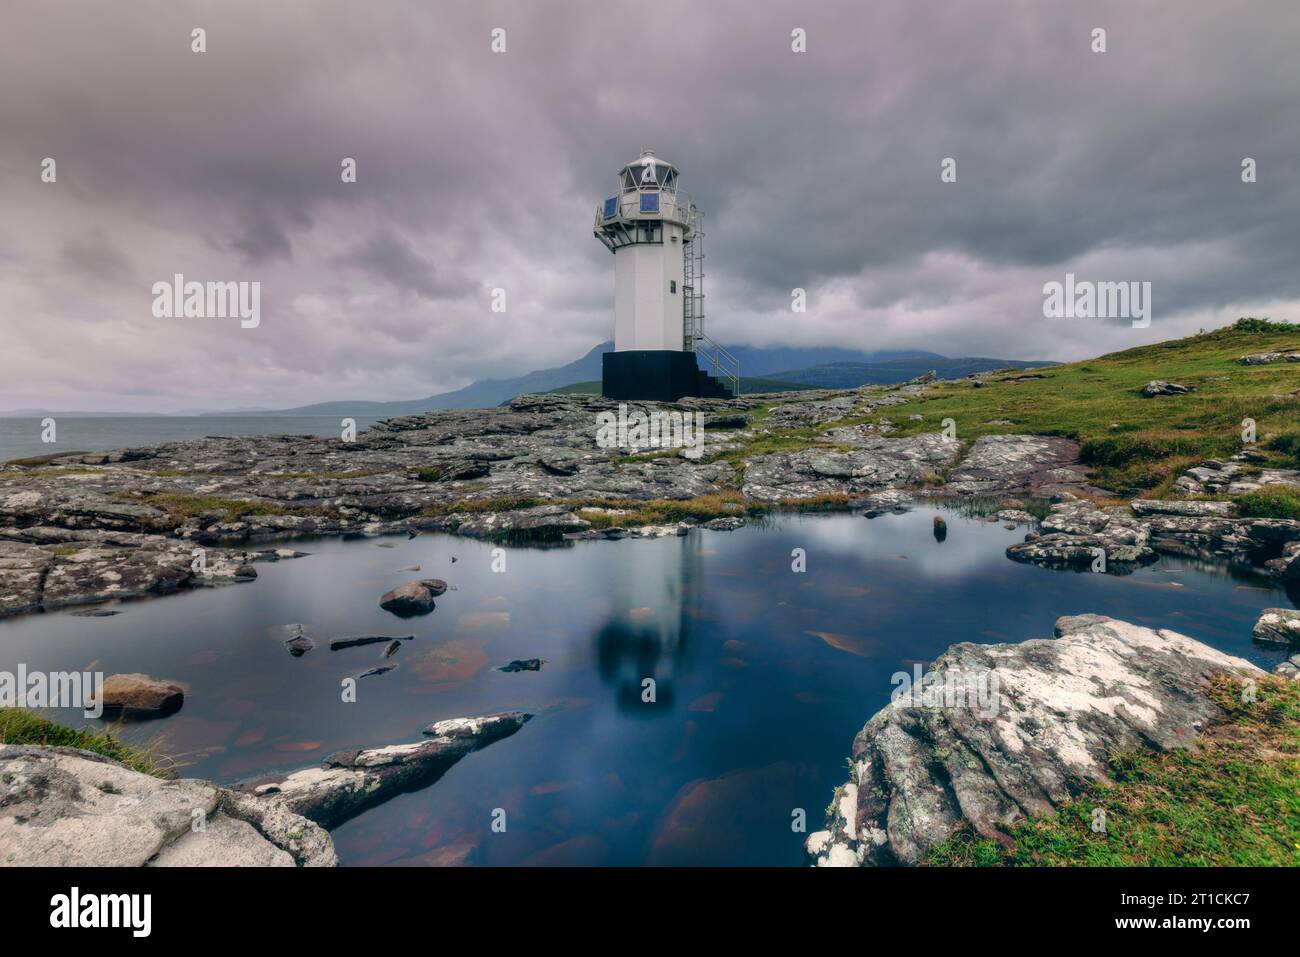 Rhue Lighthouse is a white lighthouse located on the coast of Loch Broom, near Ullapool, Scotland. Stock Photo